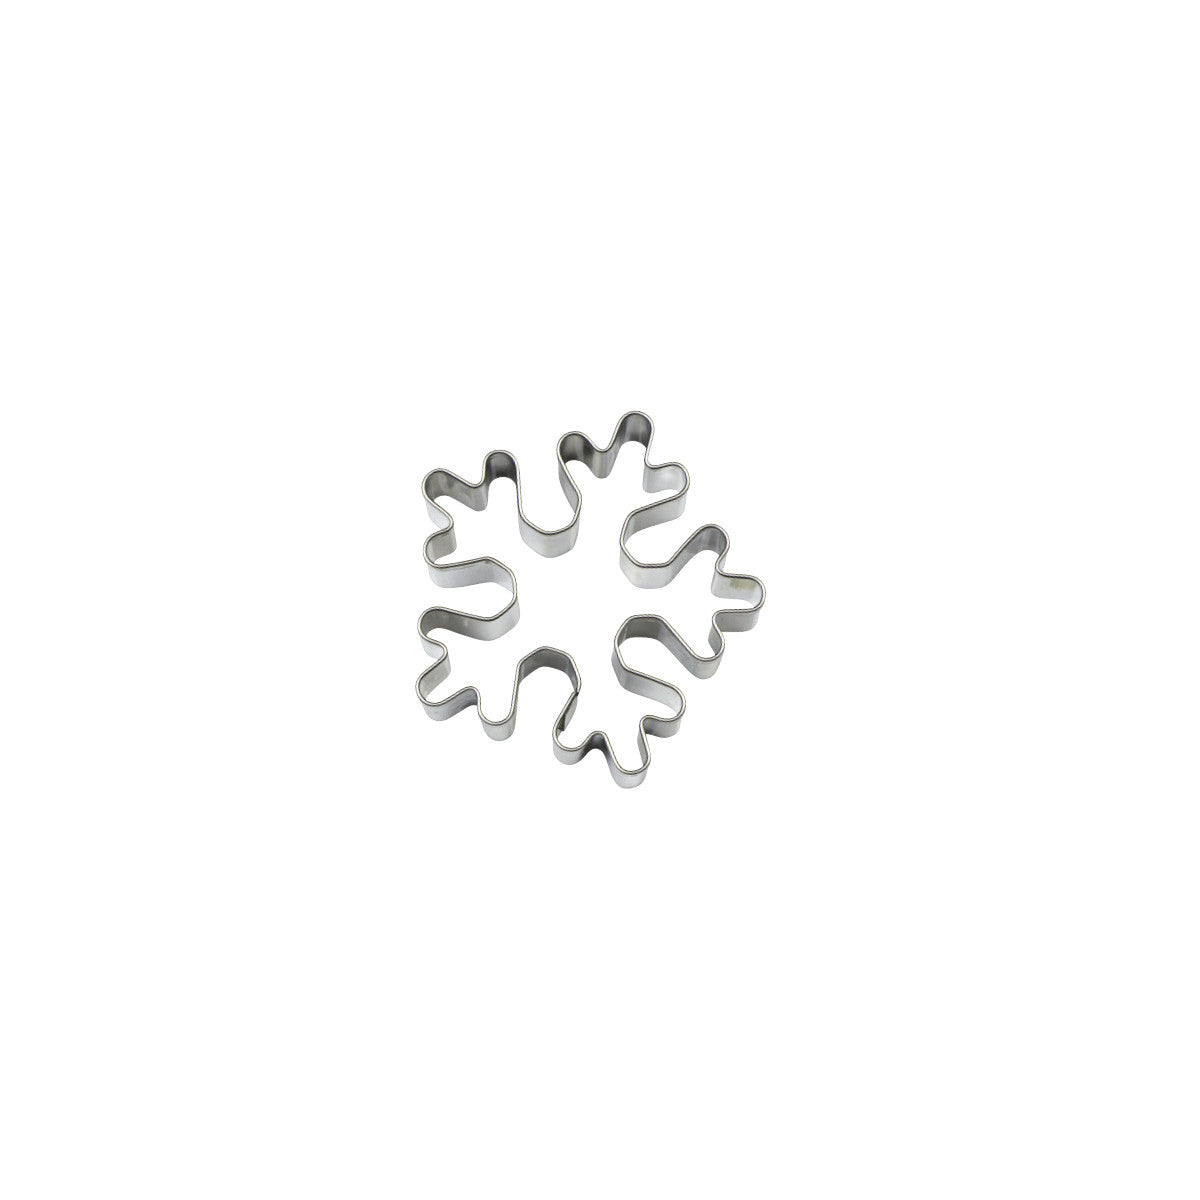 SNOWFLAKE 4 cm COOKIE CUTTER